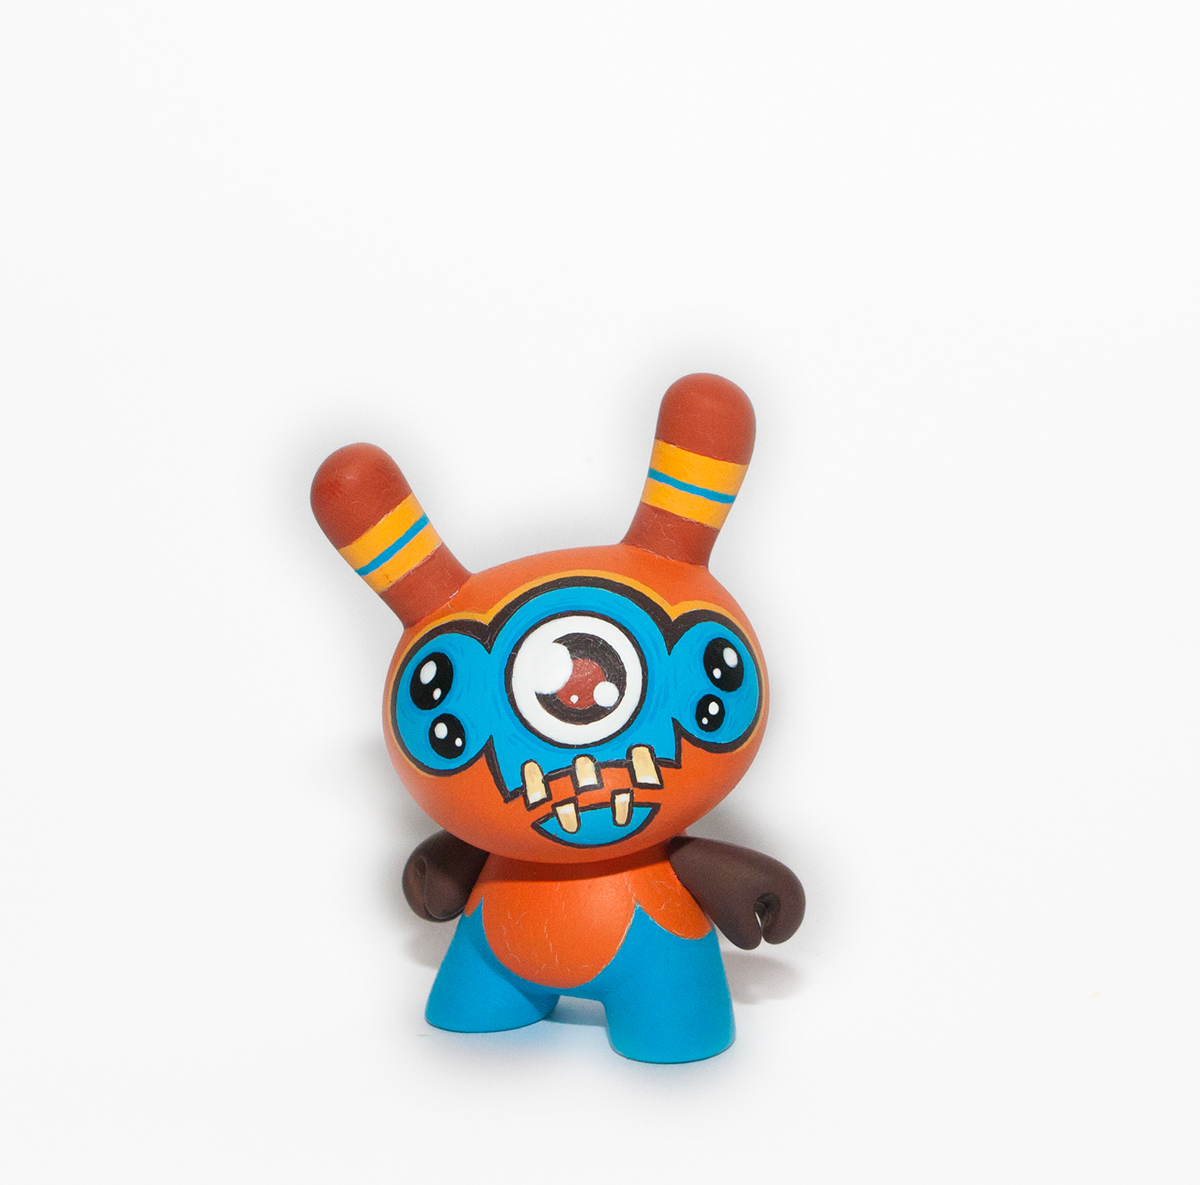 Wuzone Custom Dunny Munny Kidrobot bearbrick haring commission toy DIY geek collectible spawn Cell artoy